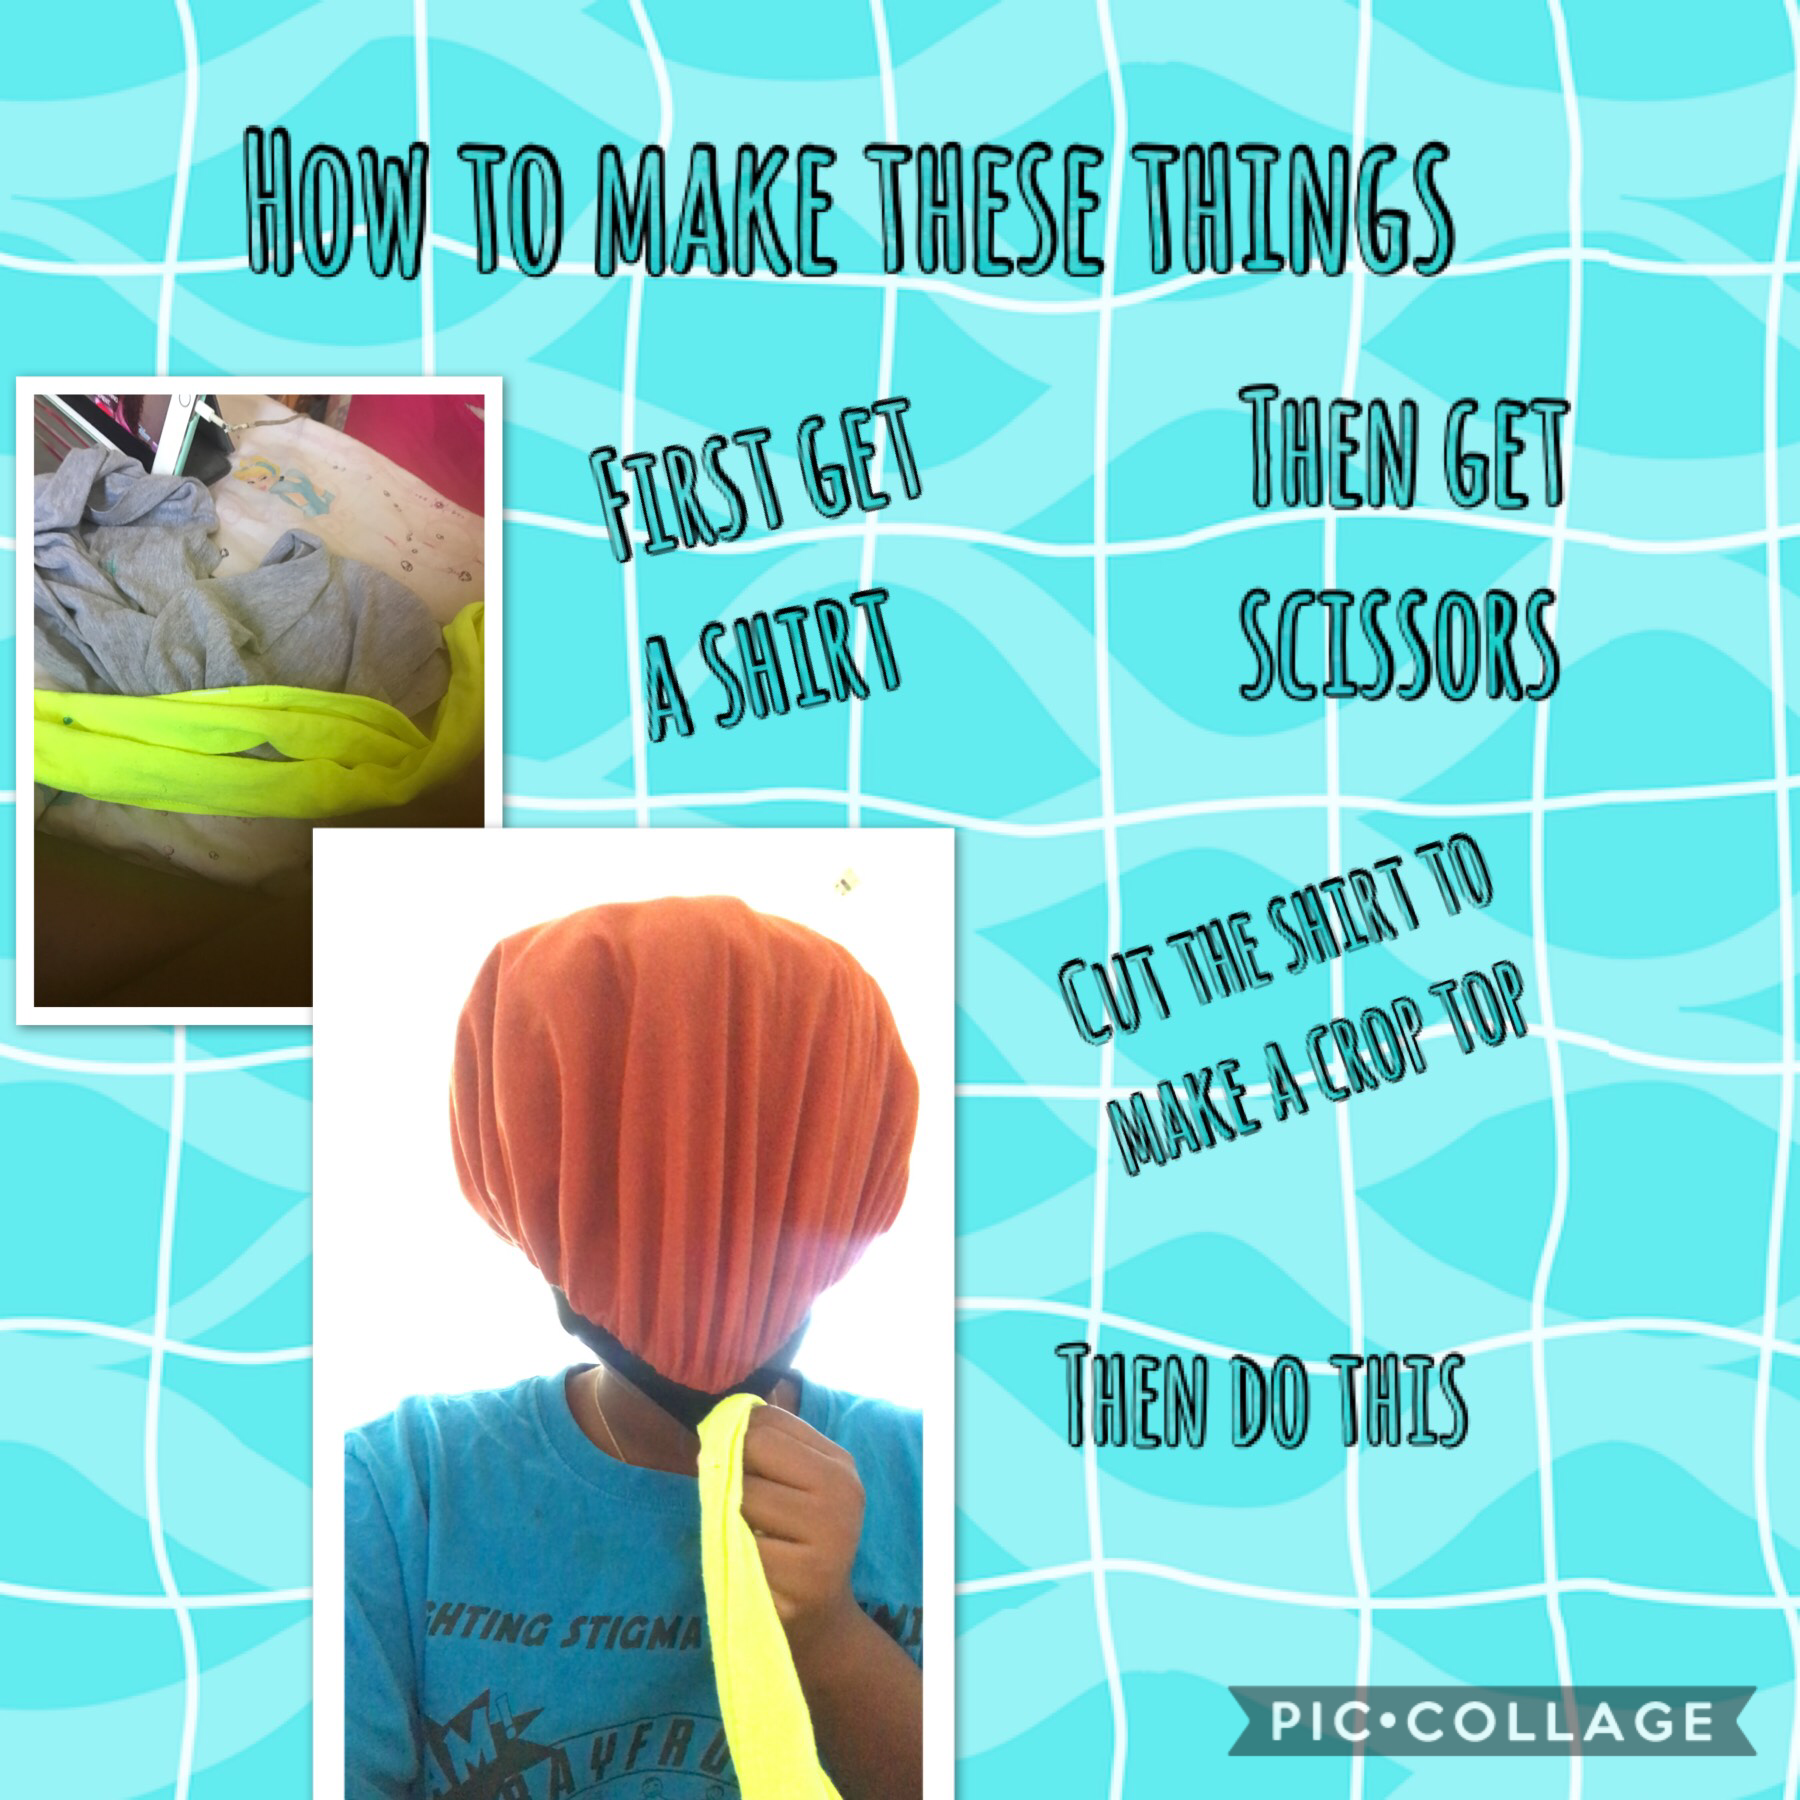 How to make these things 